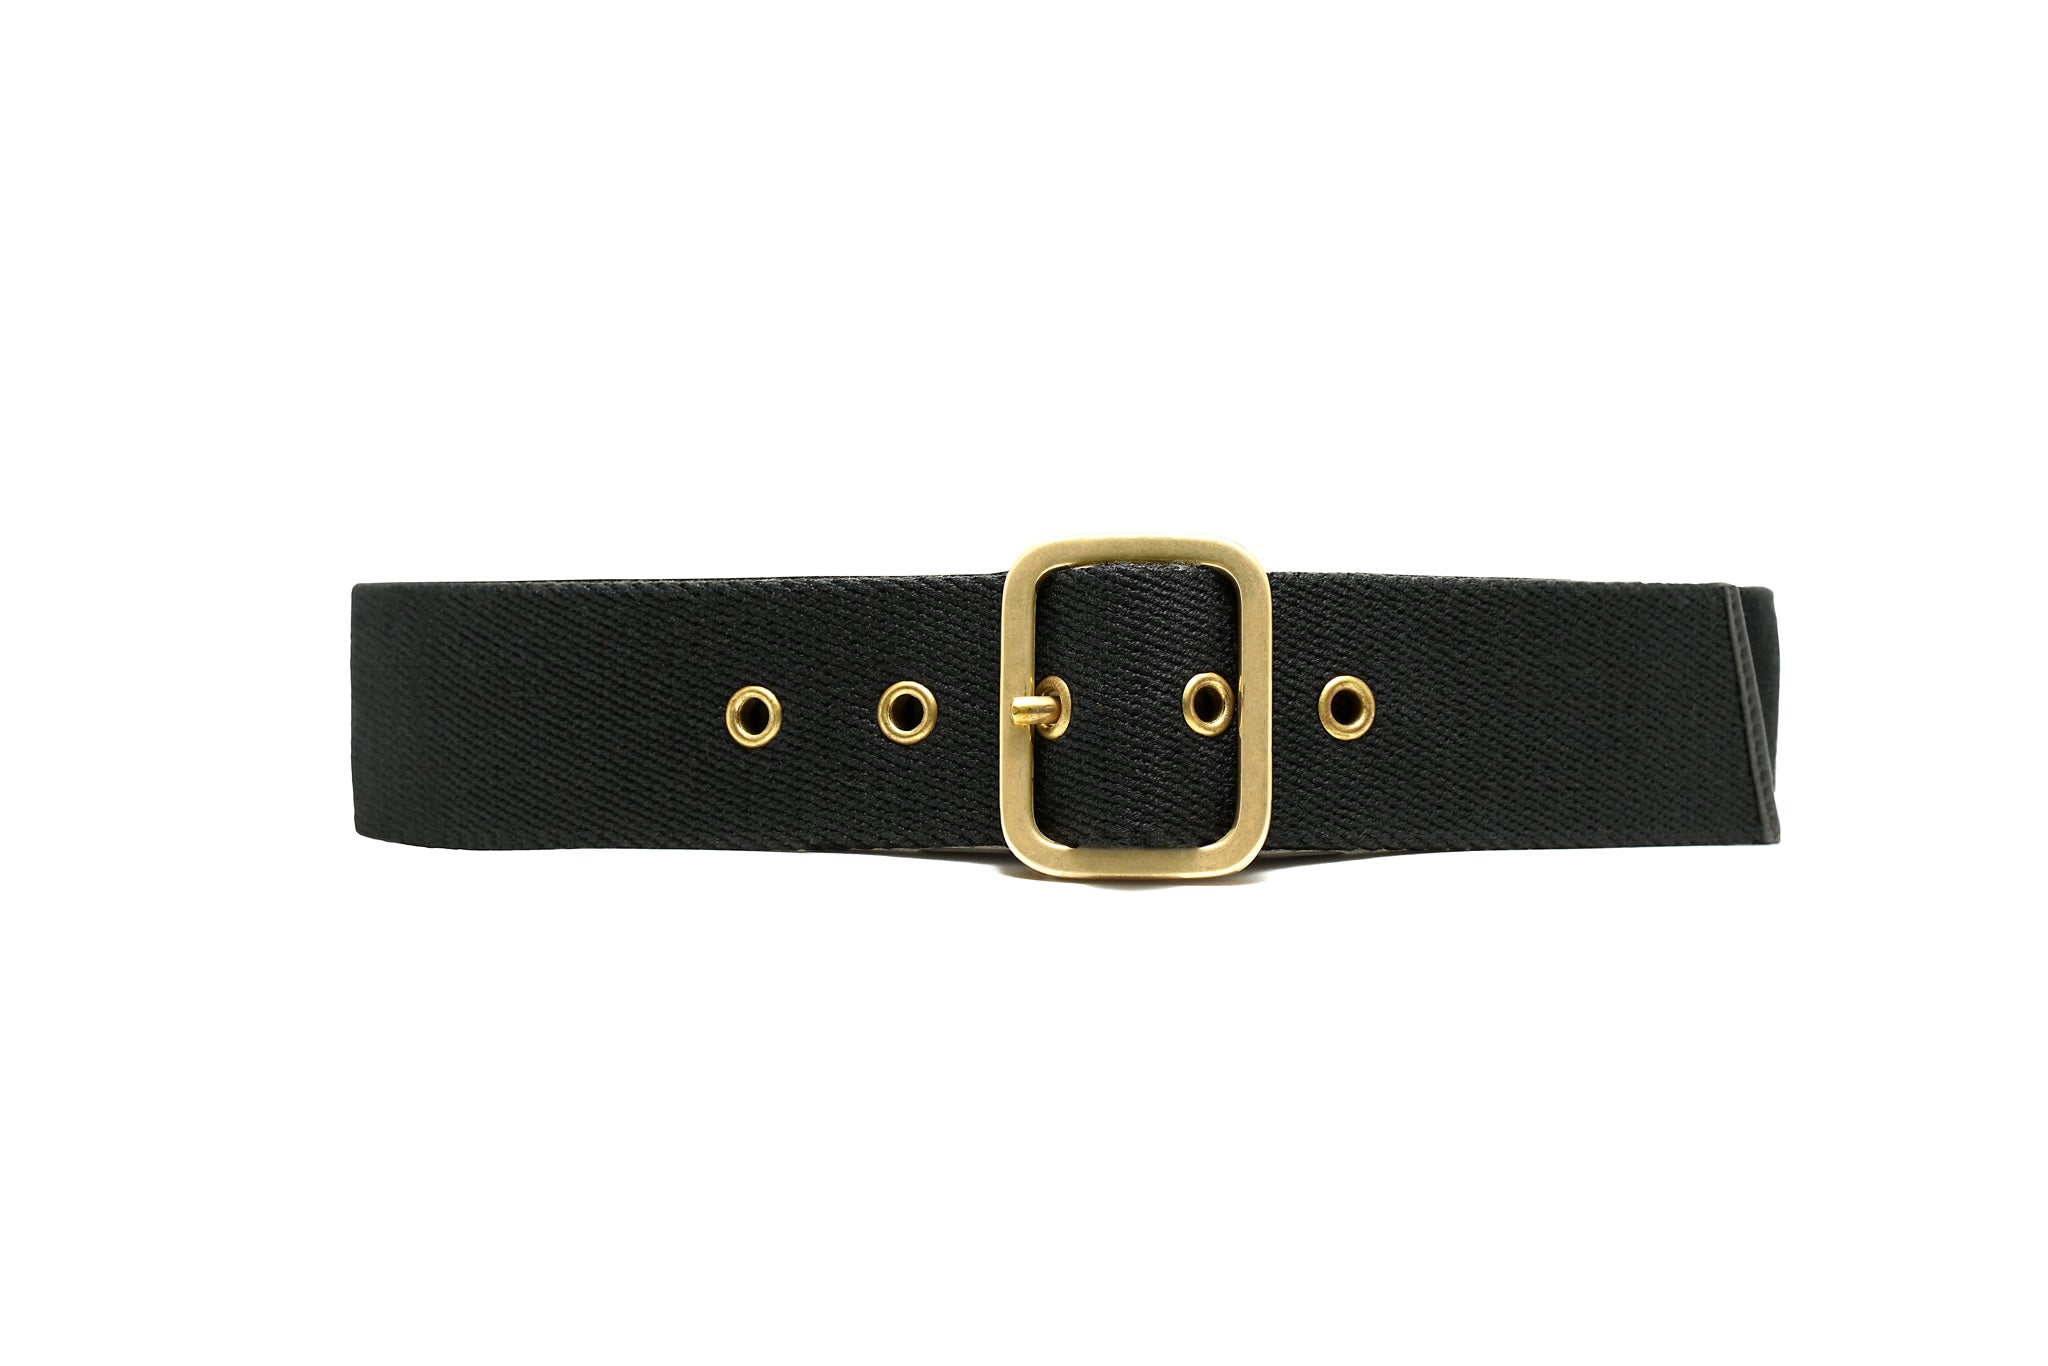 Blix Belt Green Webbing with Brass Buckle and Black Leather Trim ISABELLA KRON